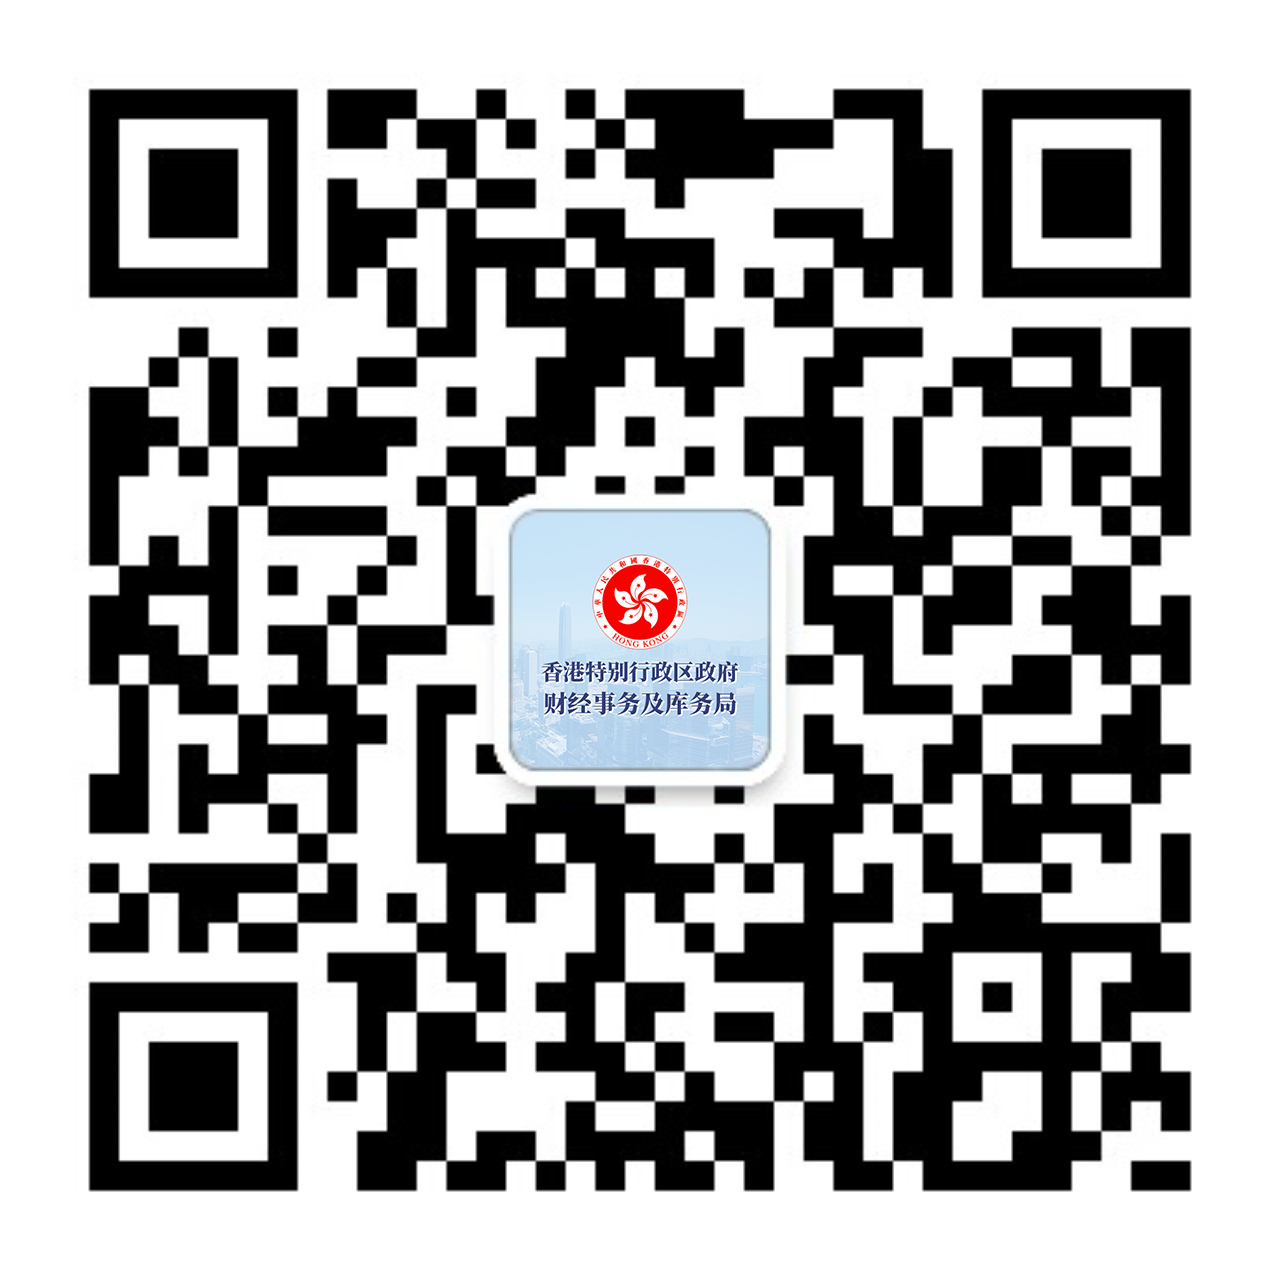 qrcode_fstb.png